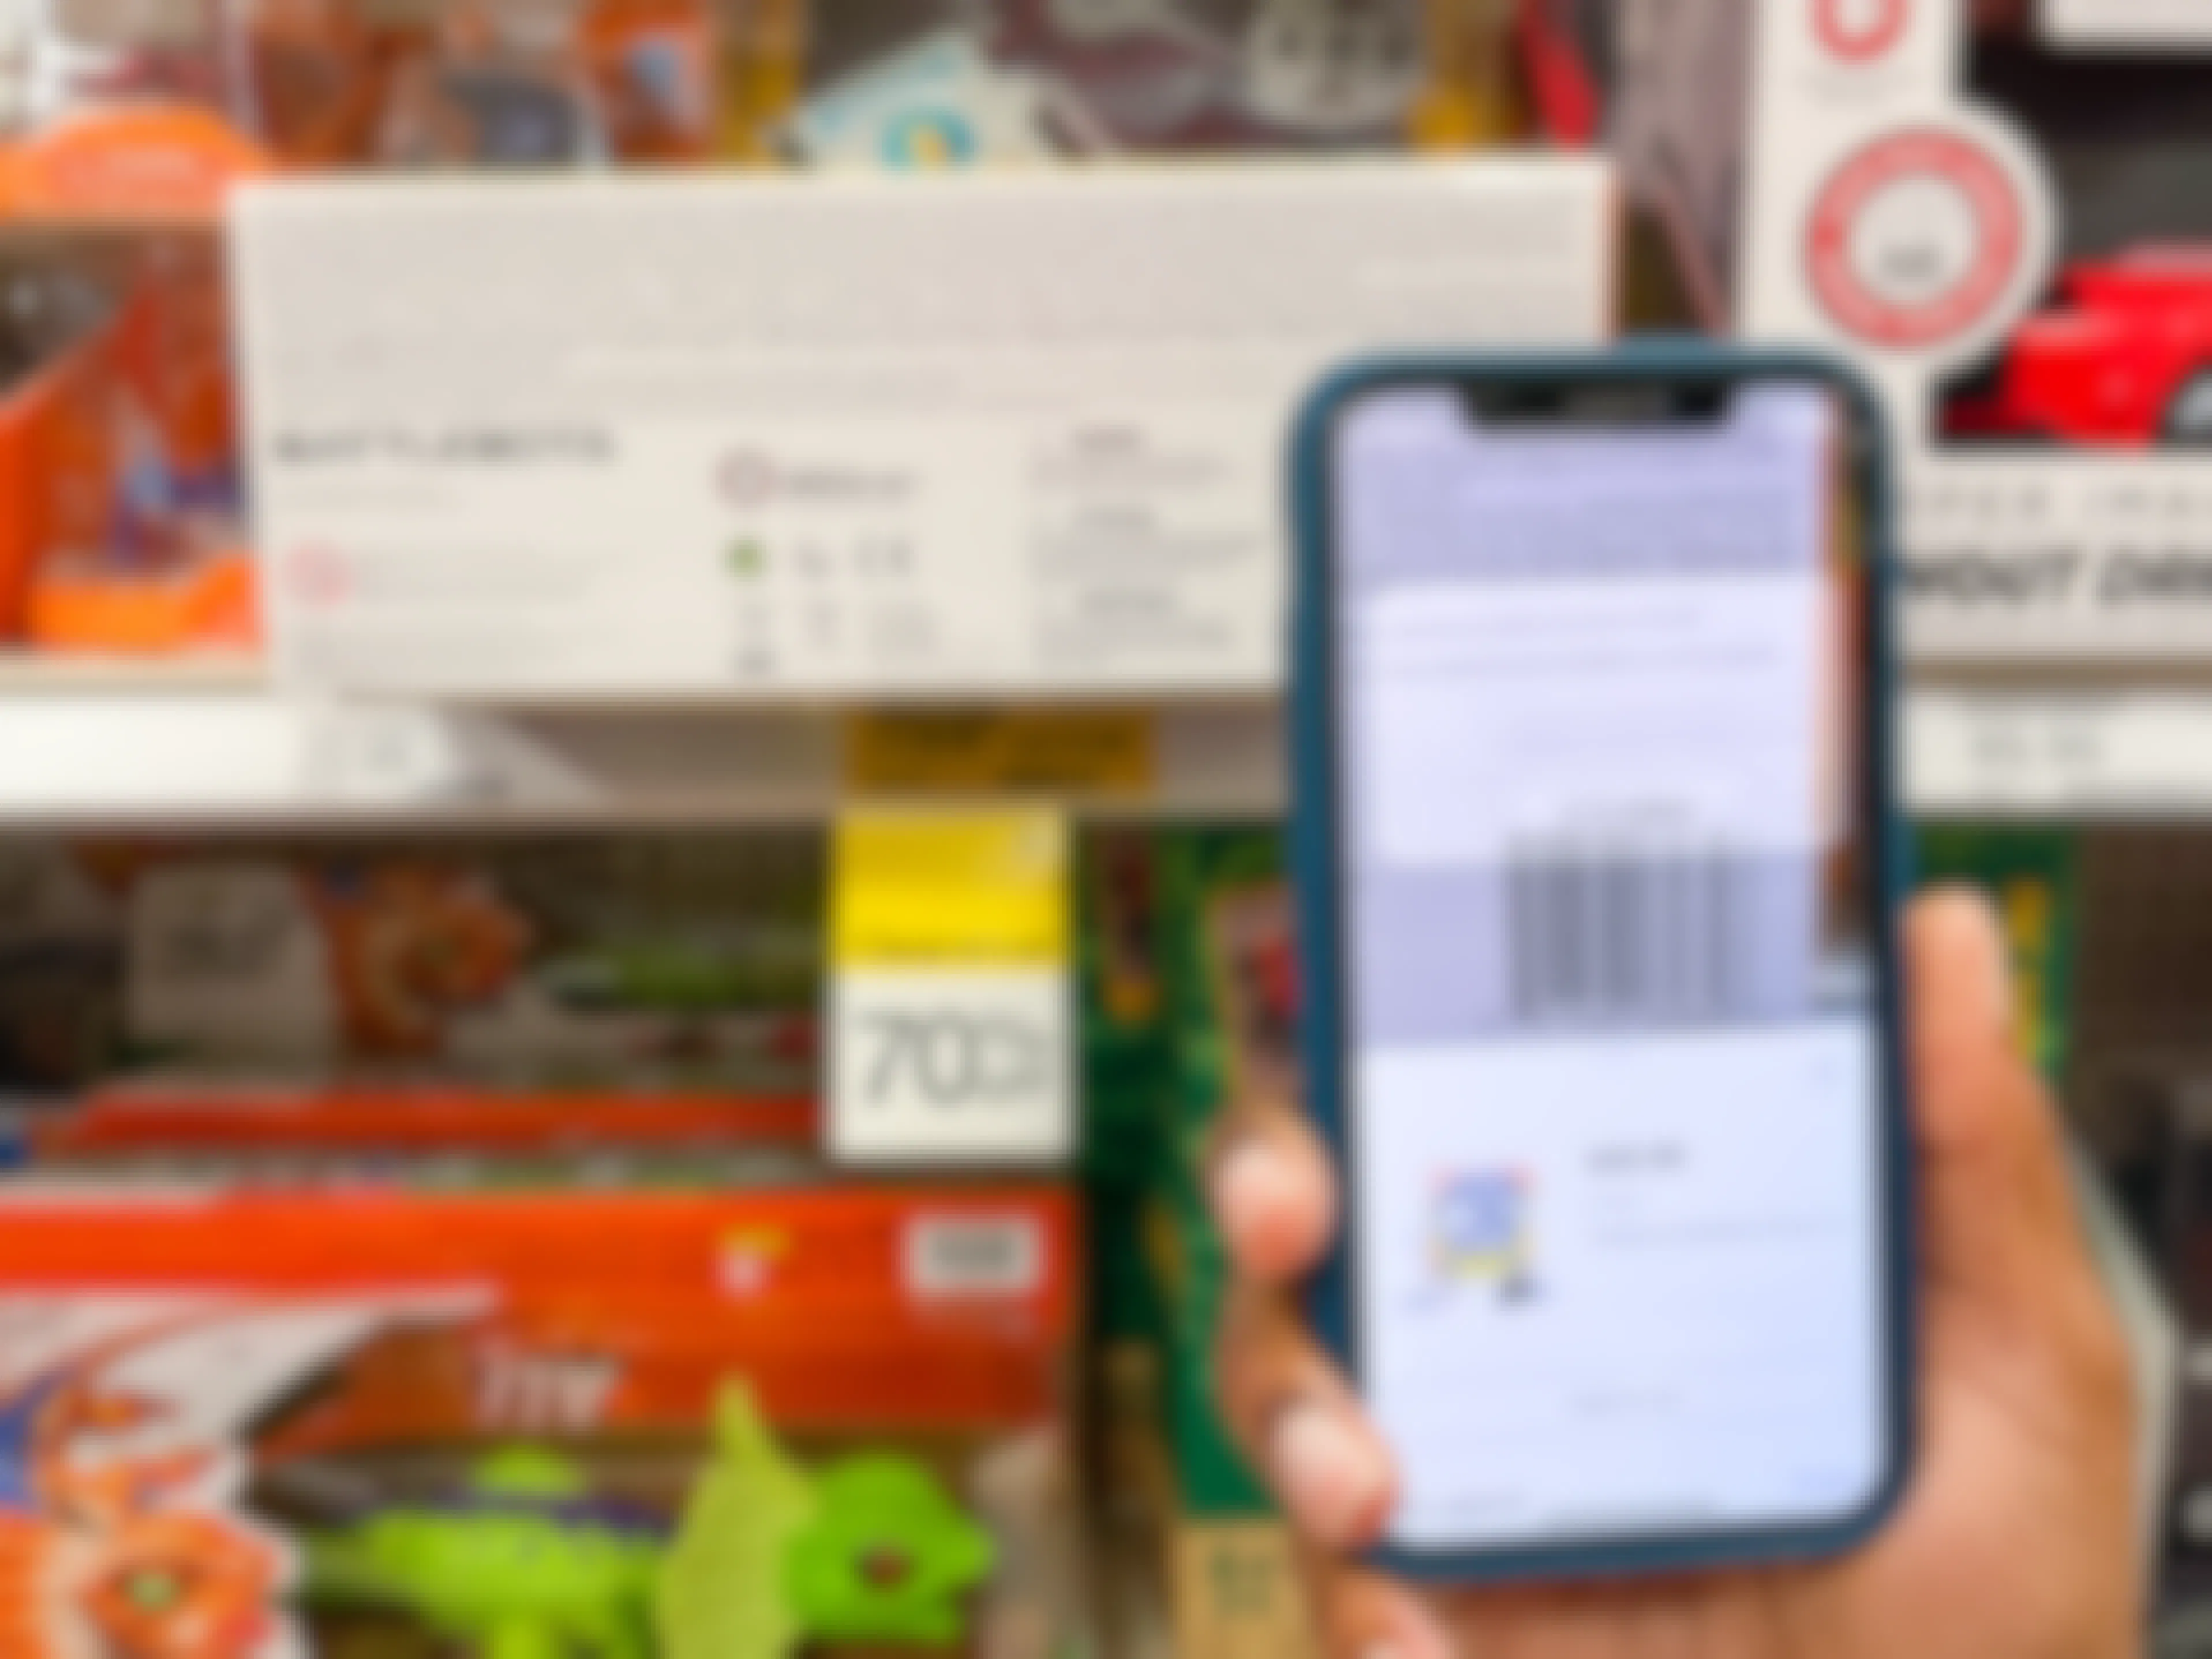 A person's hand holding up an iPhone and scanning a clearance toy's barcode with the Target app.